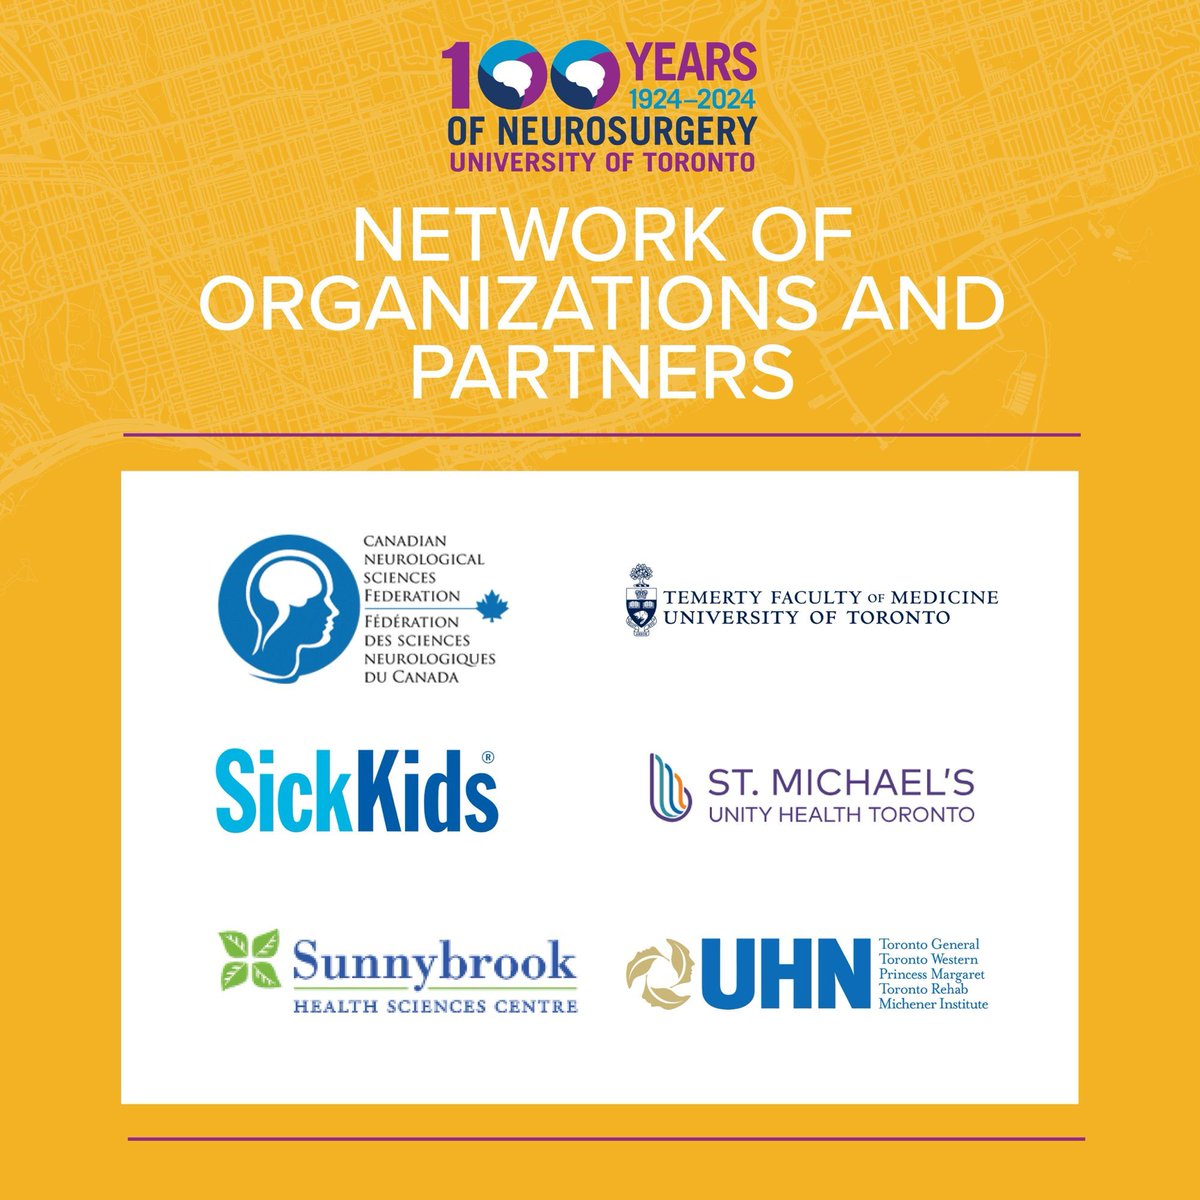 As the Division of #Neurosurgery, we are proud of our esteemed network of #organizations and partners for our #100th anniversary celebrations. These include: @CNSFNeuroLinks @UHN @uottmedicine @SickKidsNews @UnityHealthTO @Sunnybrook